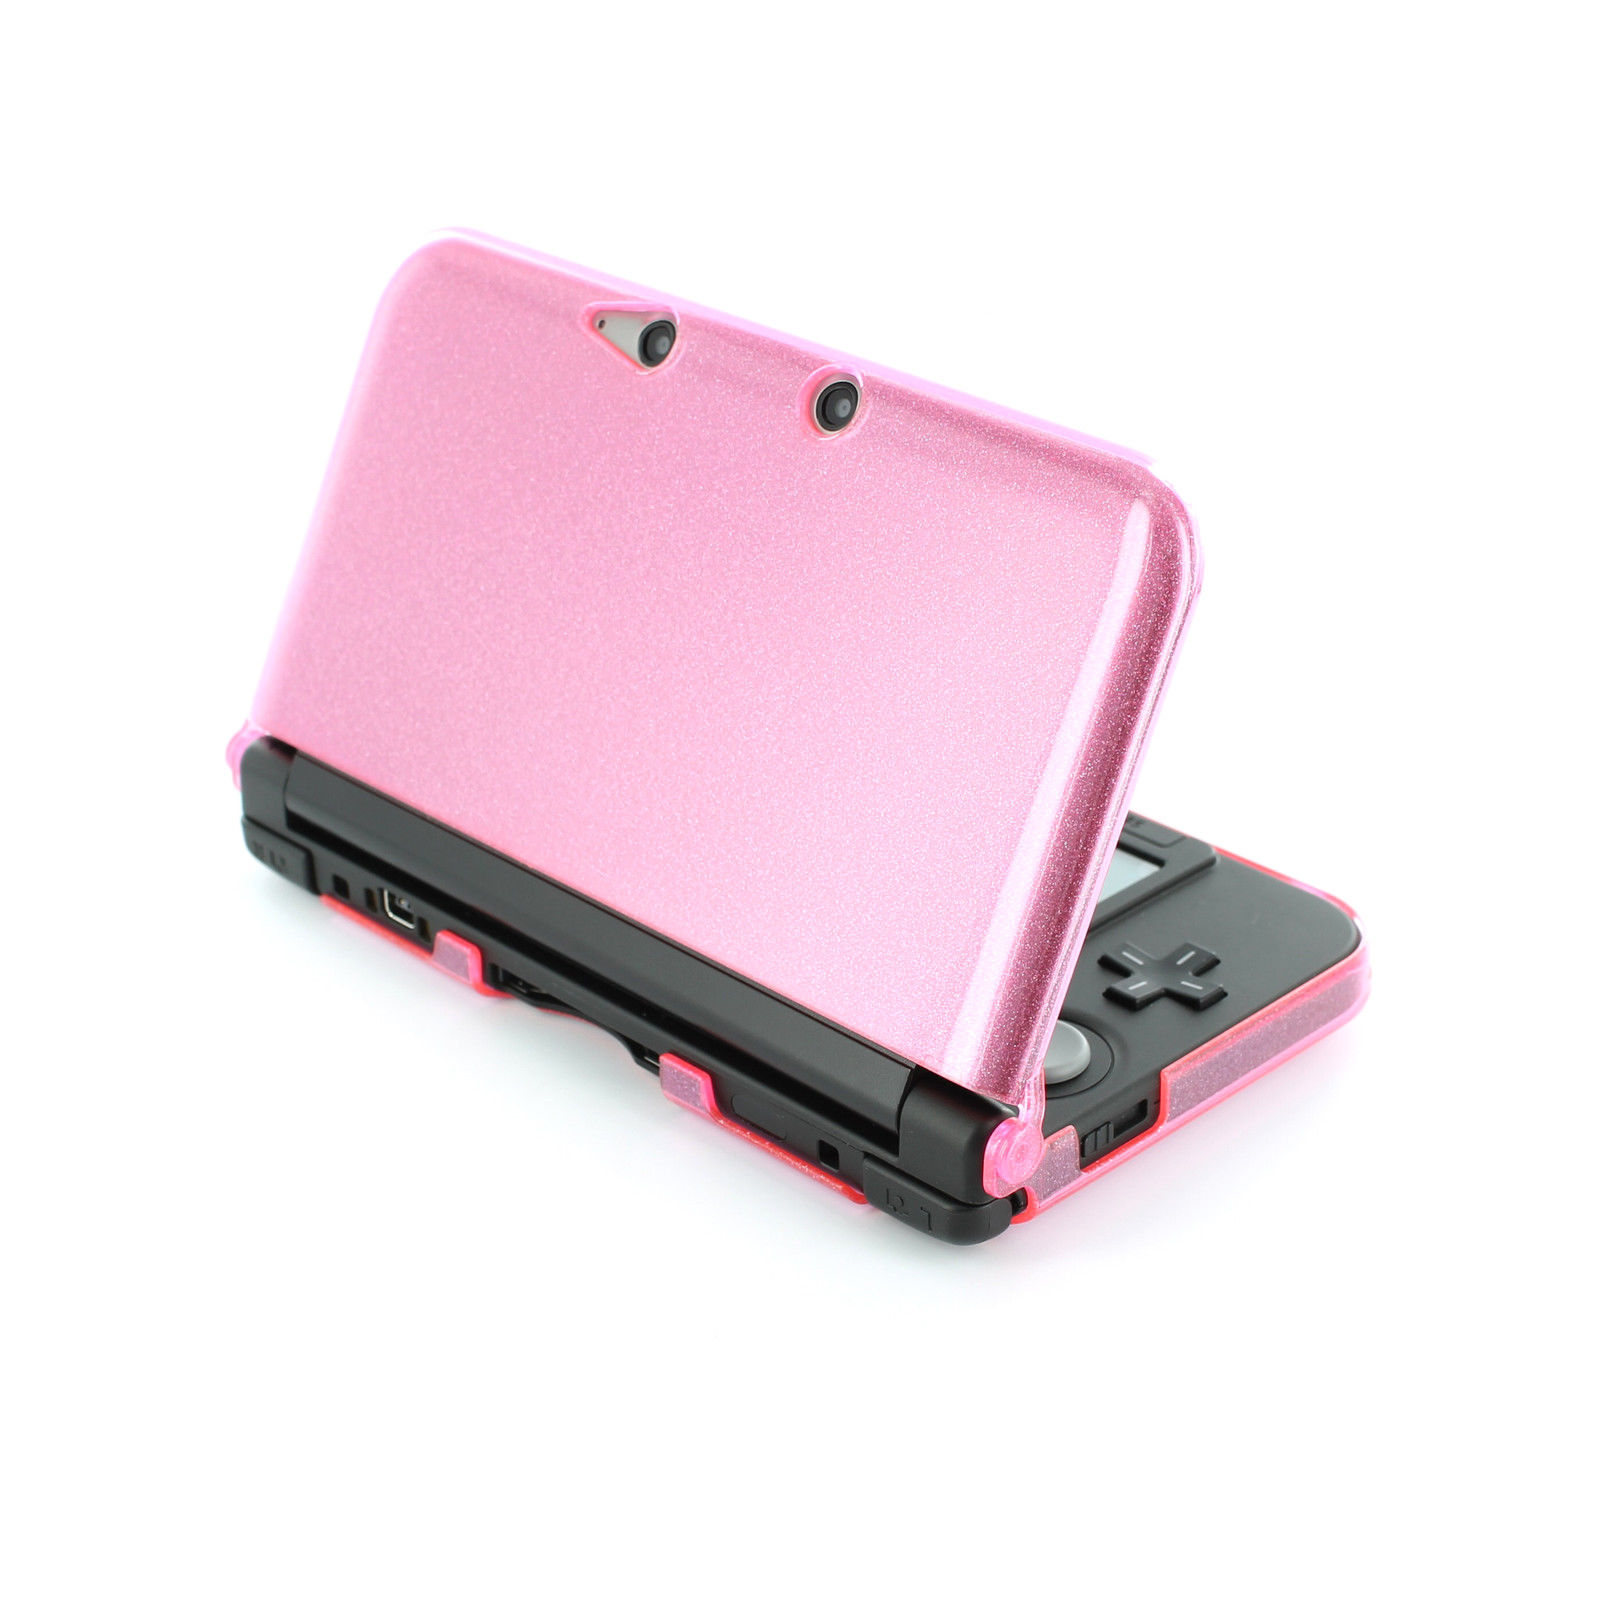 3ds protective case